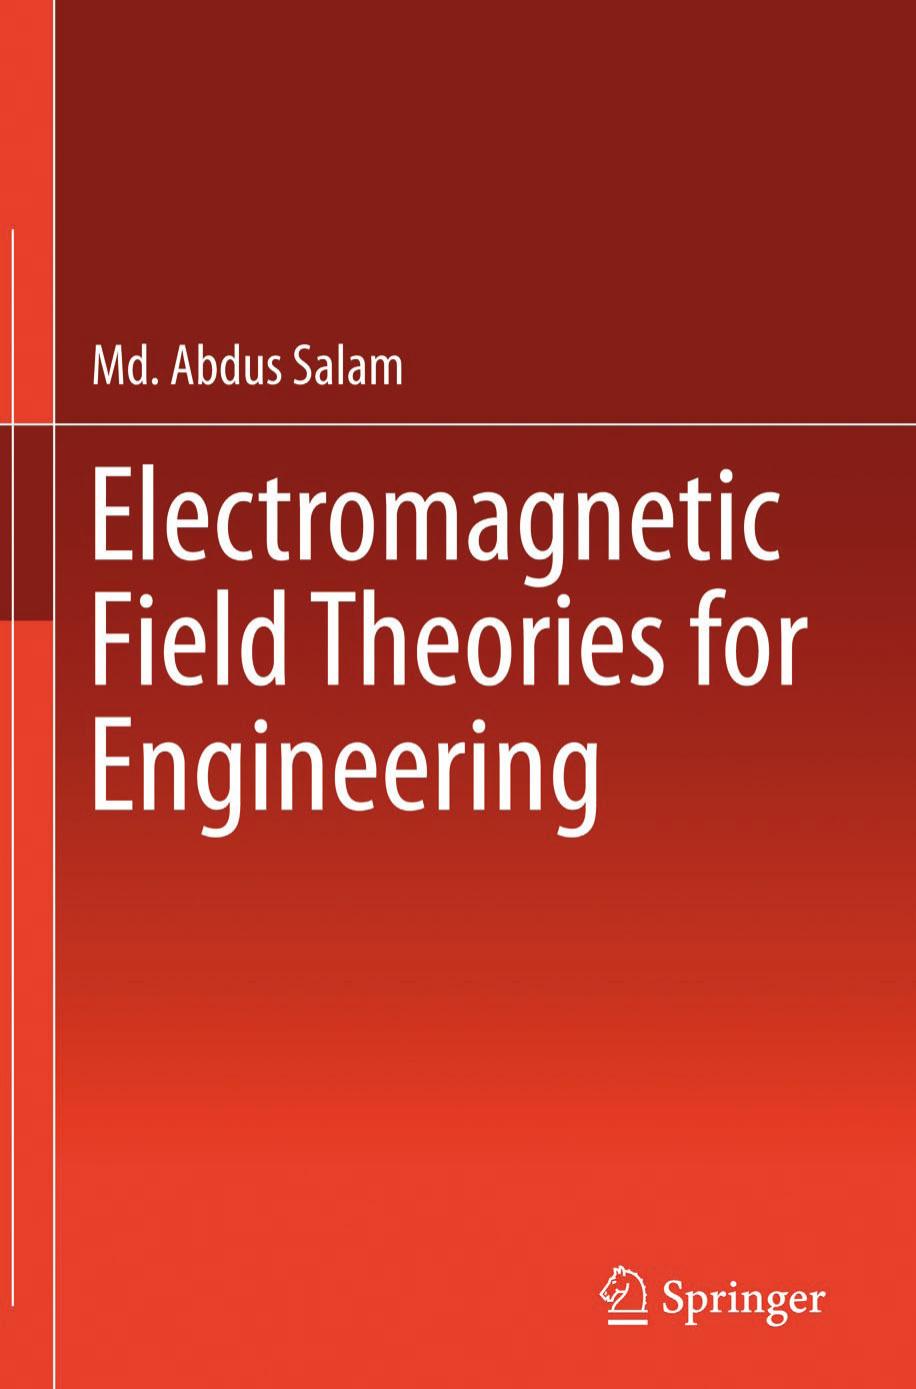 Electromagnetic Field Theories for Engineering 2014 ( PDFDrive.com ) (4)